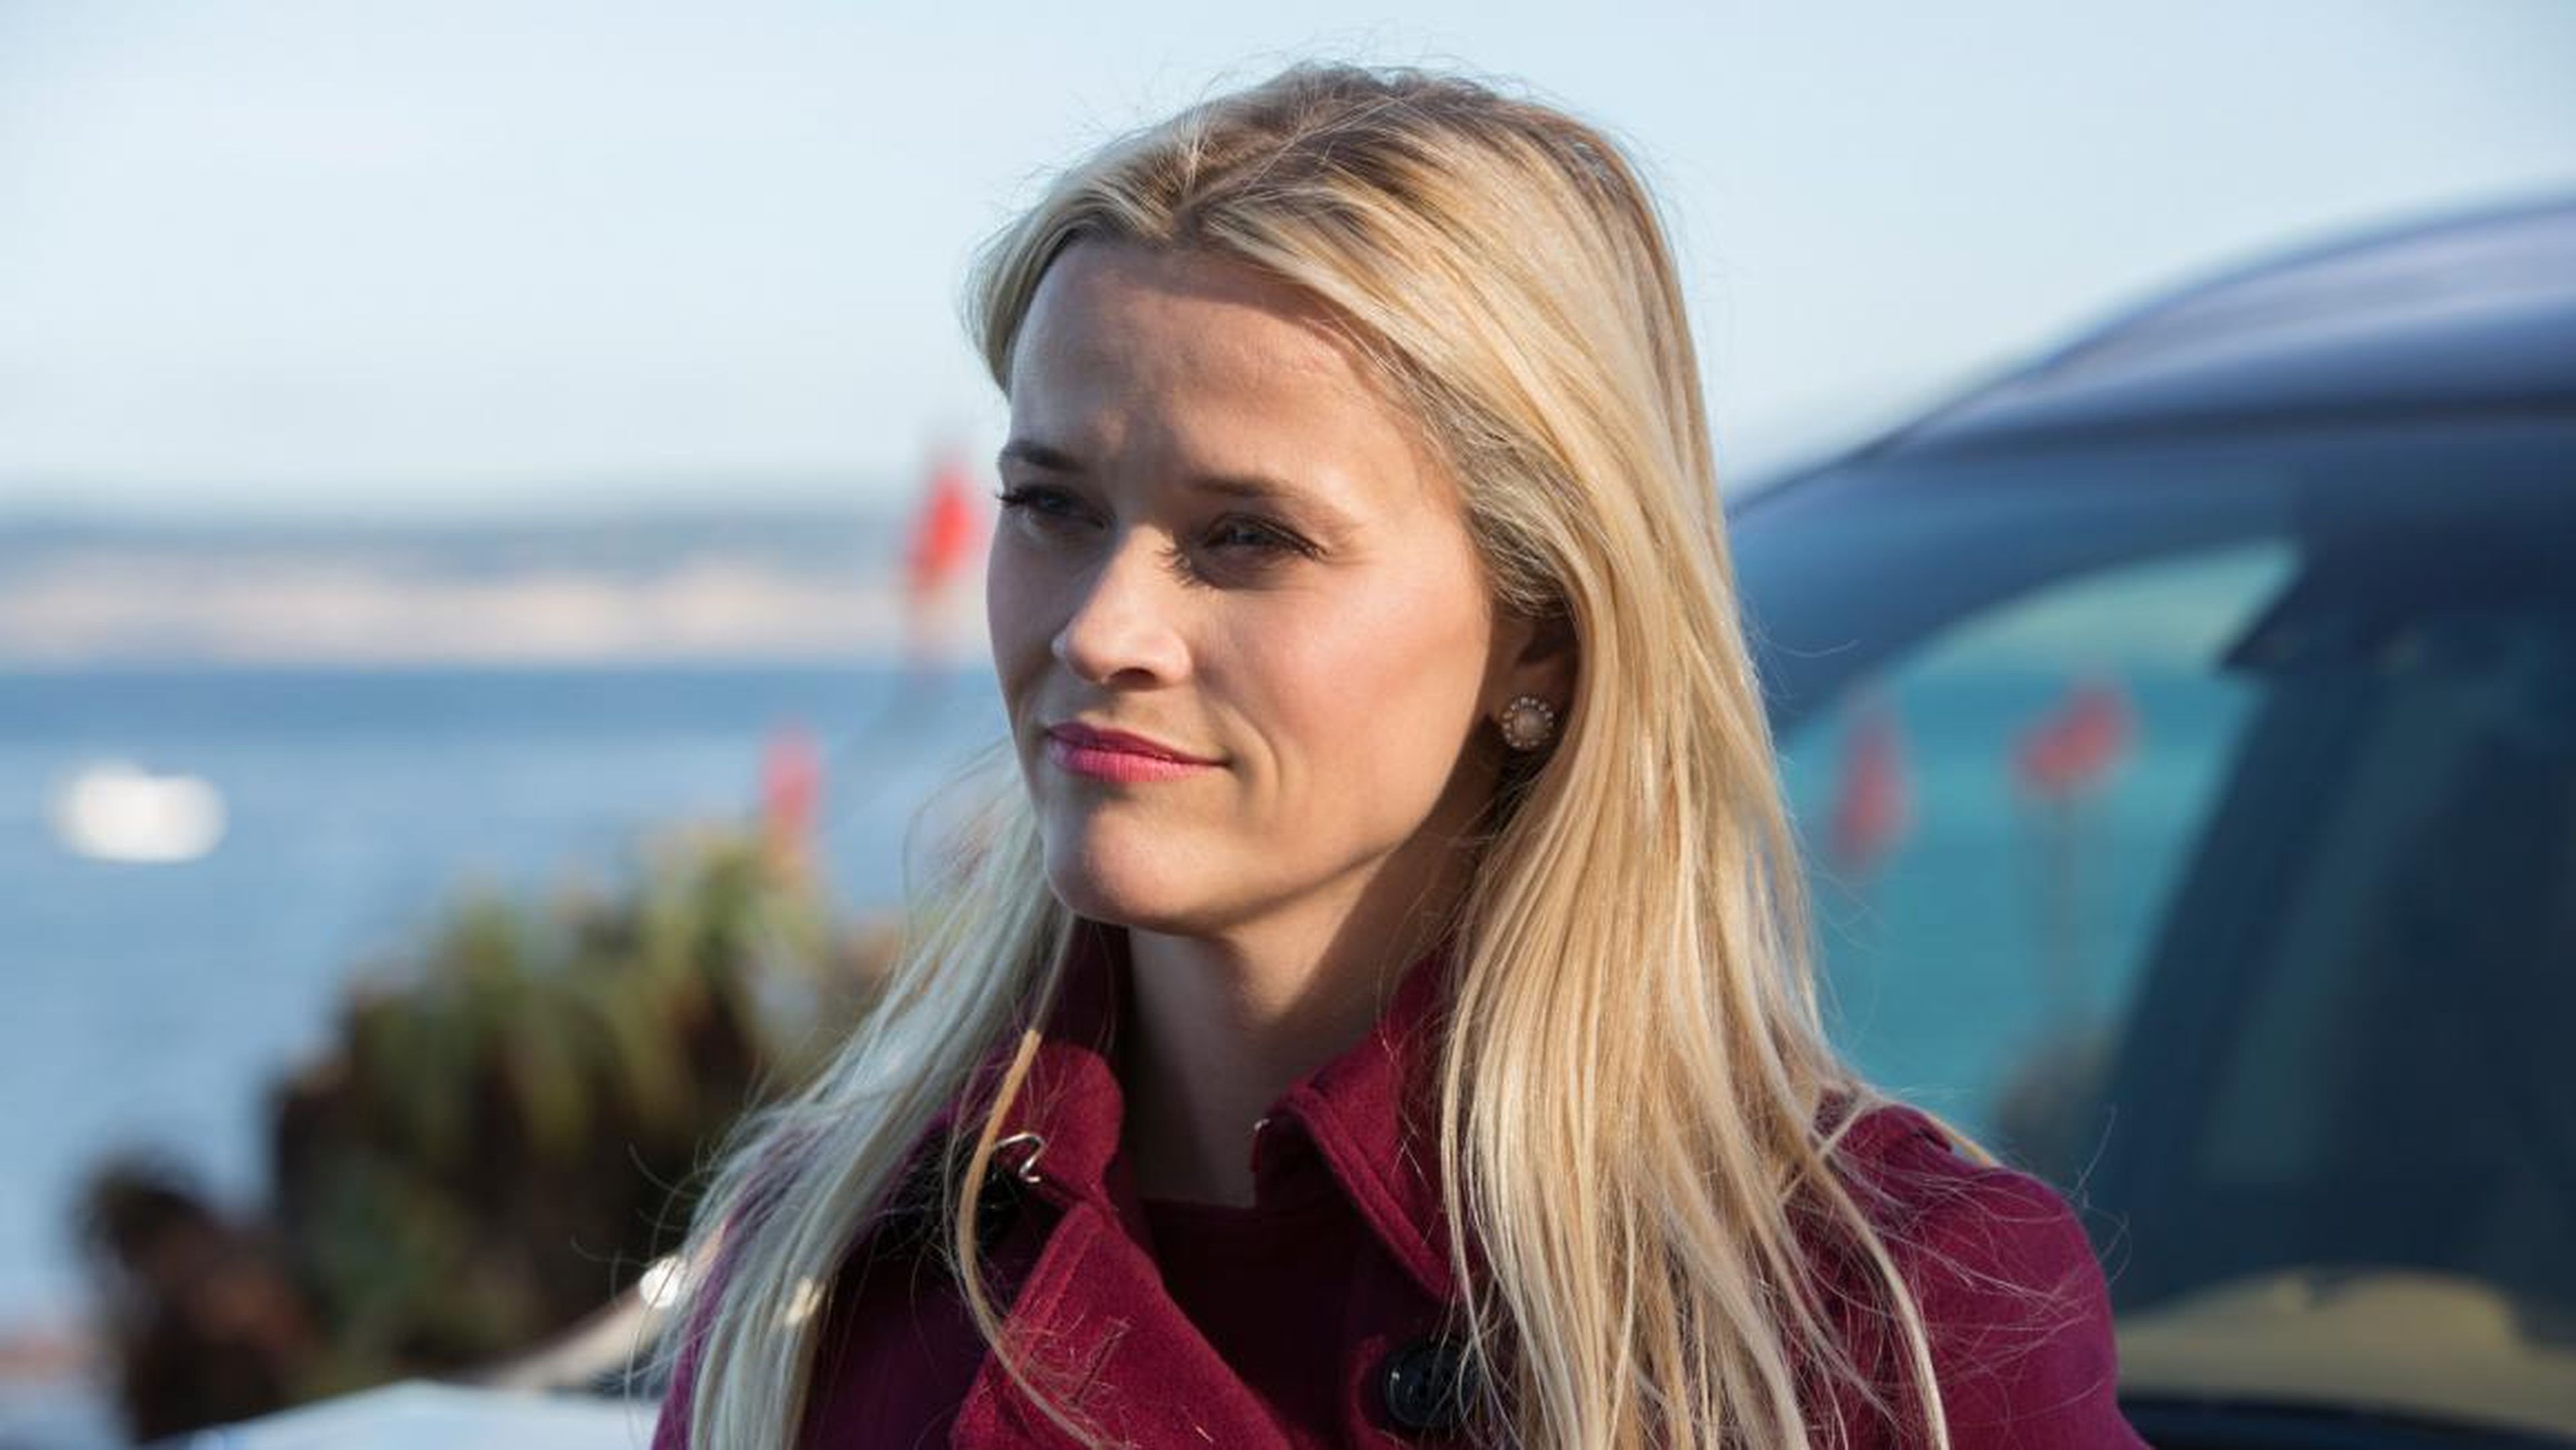 $1,000,000 — Reese Witherspoon, "Big Little Lies" (HBO)